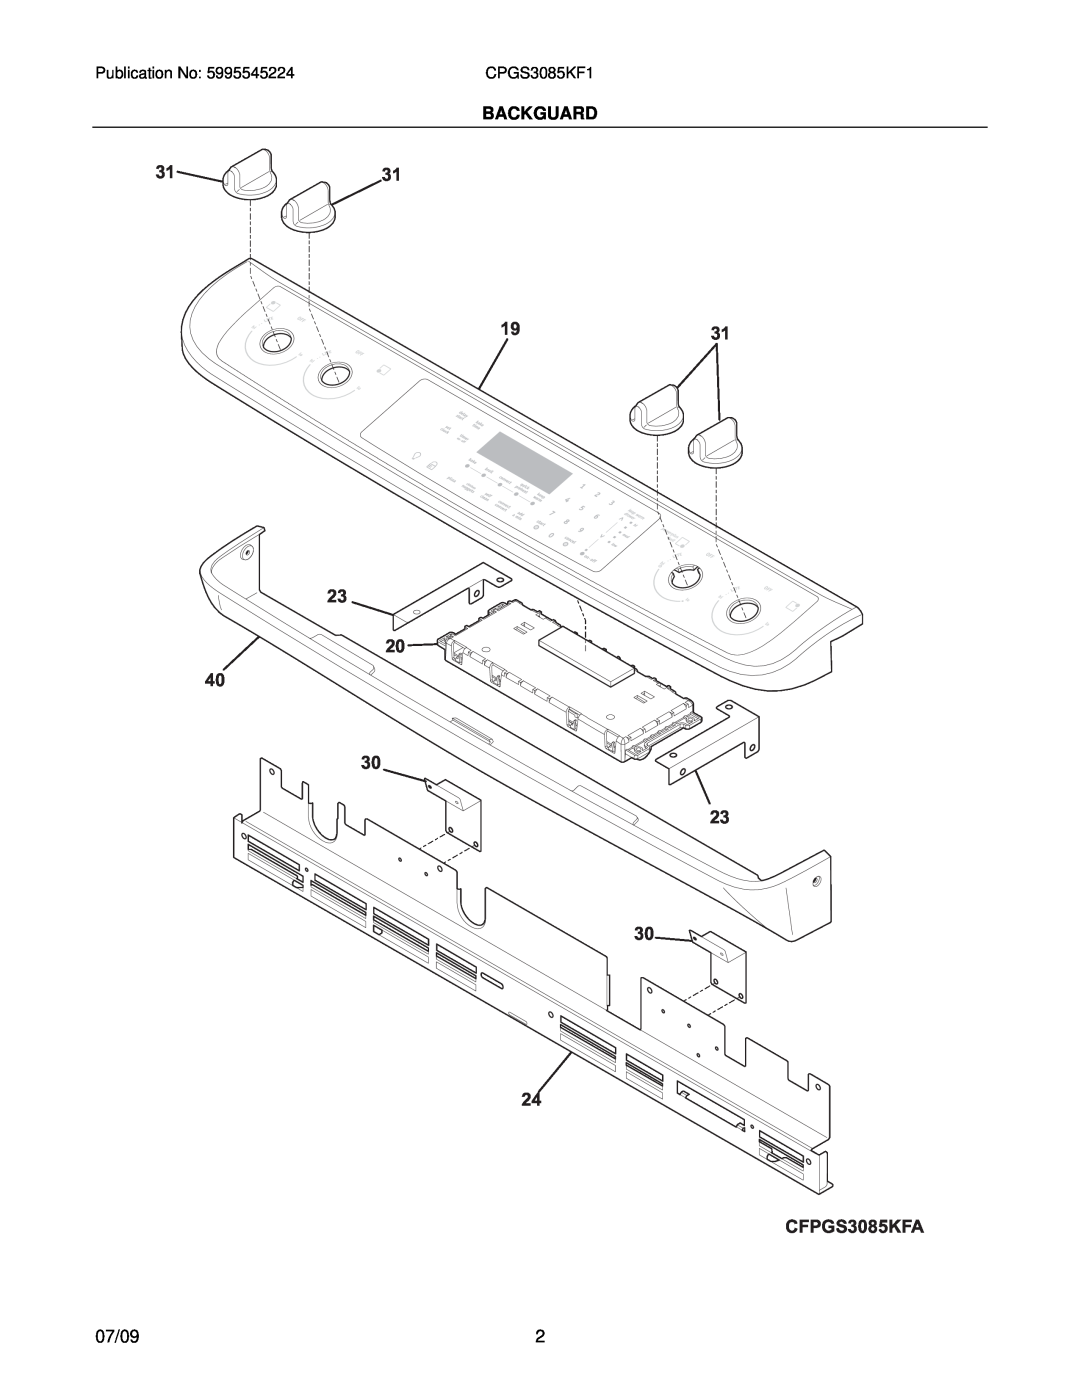 Electrolux CPGS3085KF1, 39452391M93S1 installation instructions 3131 1931, CFPGS3085KFA, Backguard, 07/09 